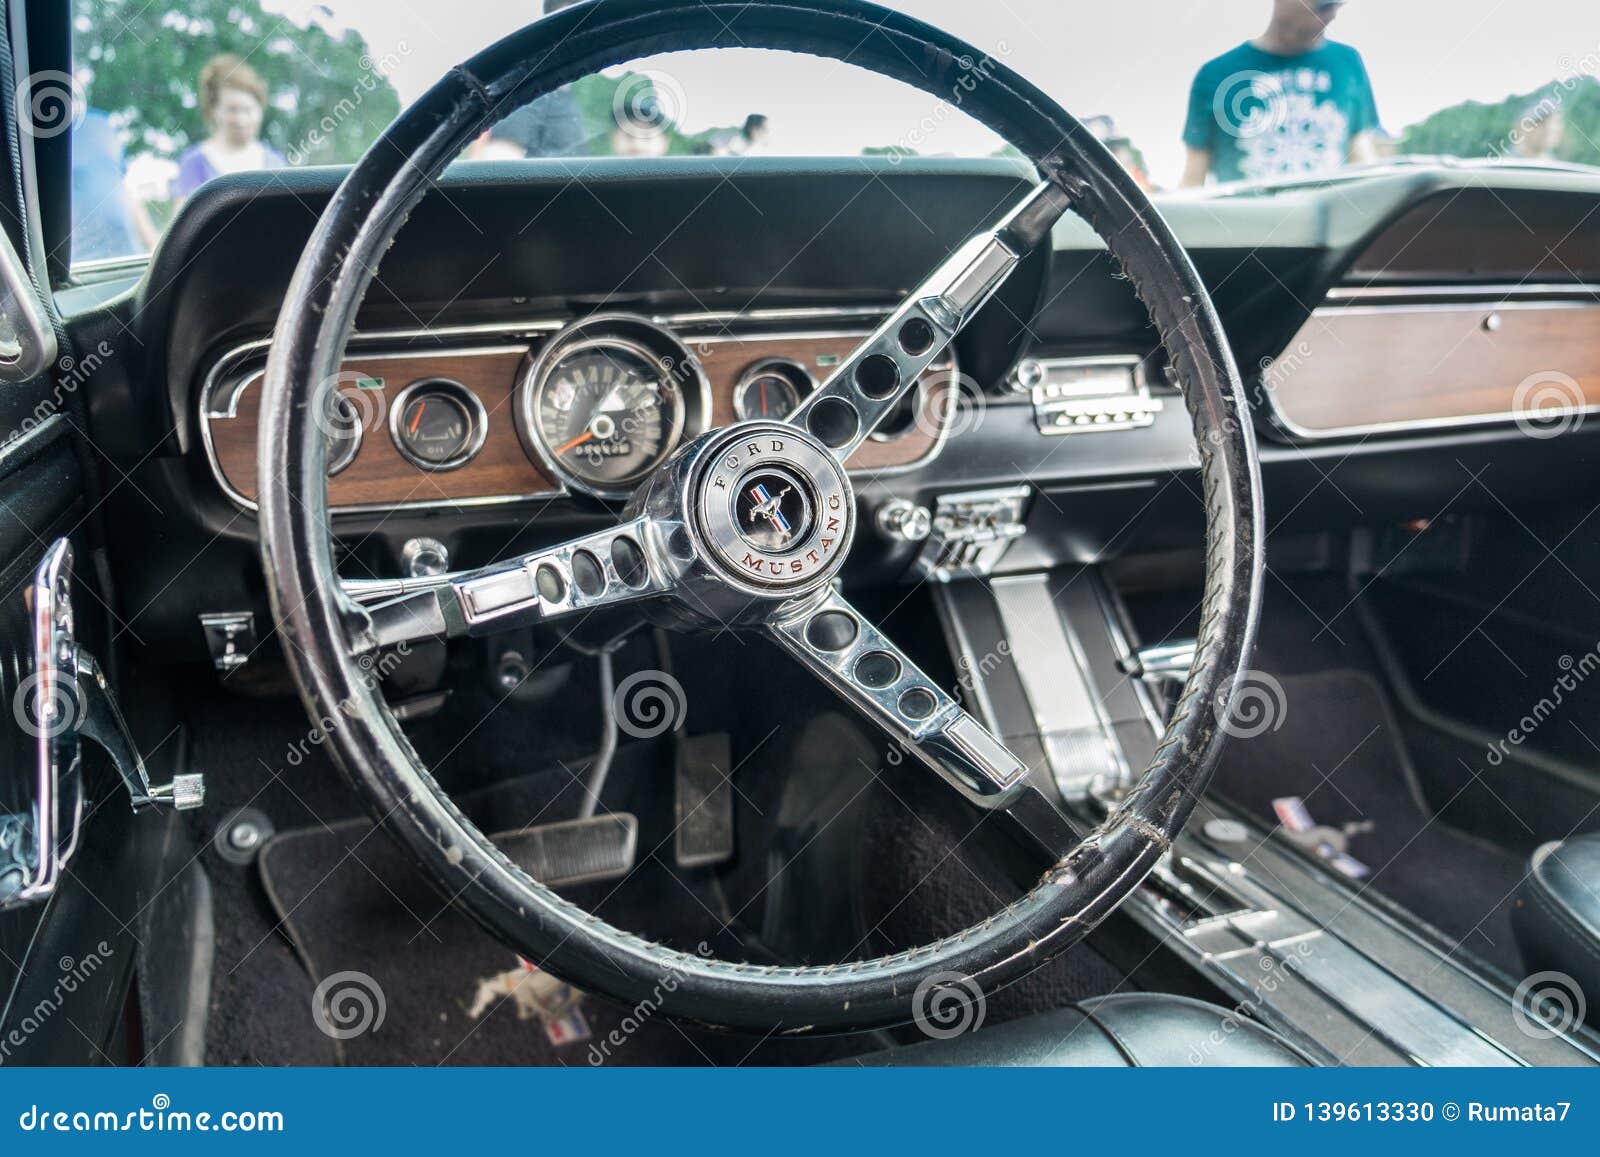 1966 Vintage Ford Mustang Interior Steering Wheel With